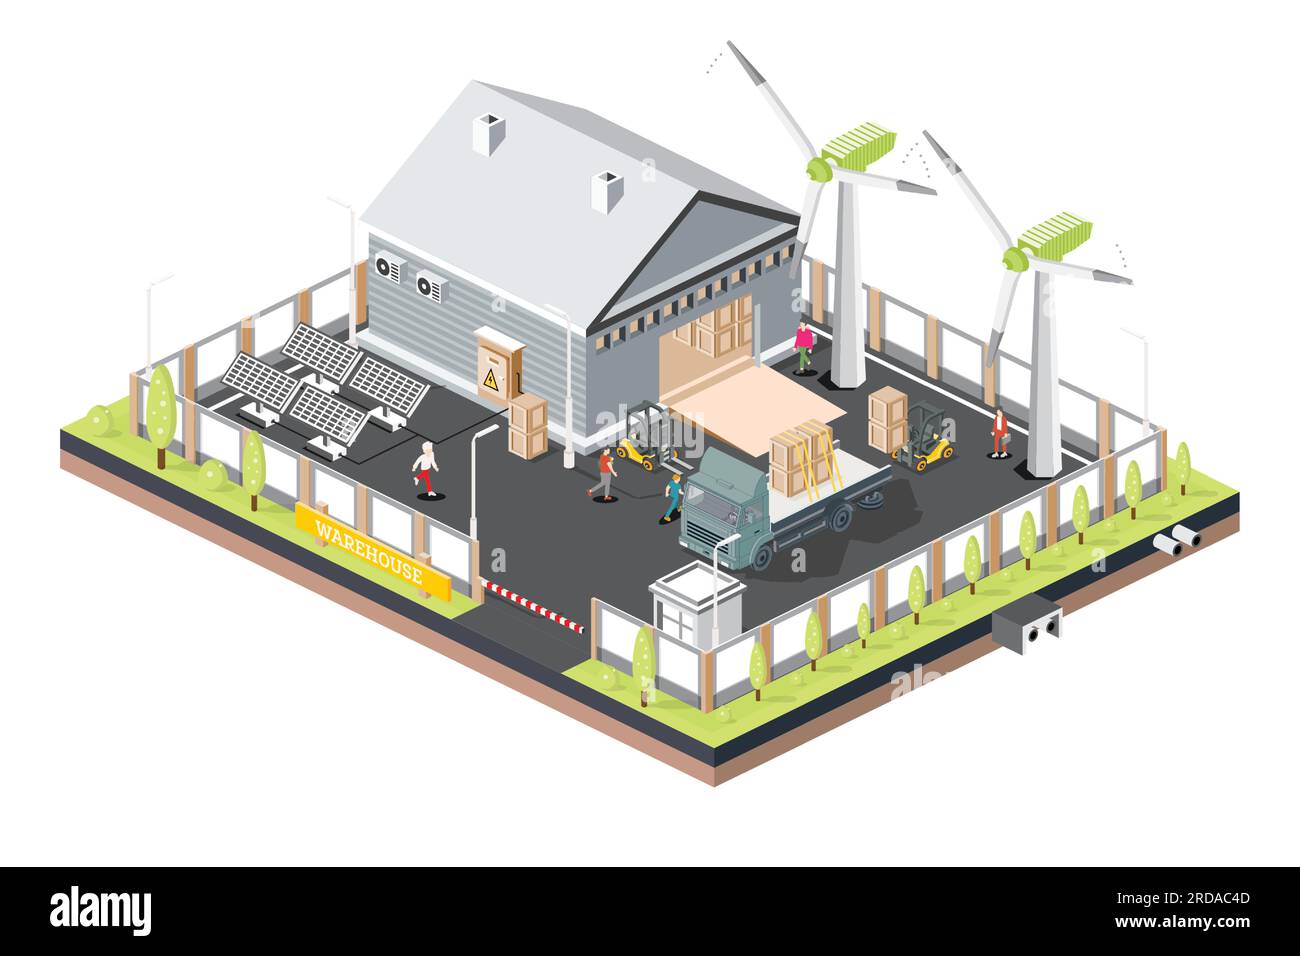 Isometric Distribution Logistic Center with Solar Panels and Wind Turbines. Warehouse Storage Facilities with Trucks. Vector Illustration. Stock Vector